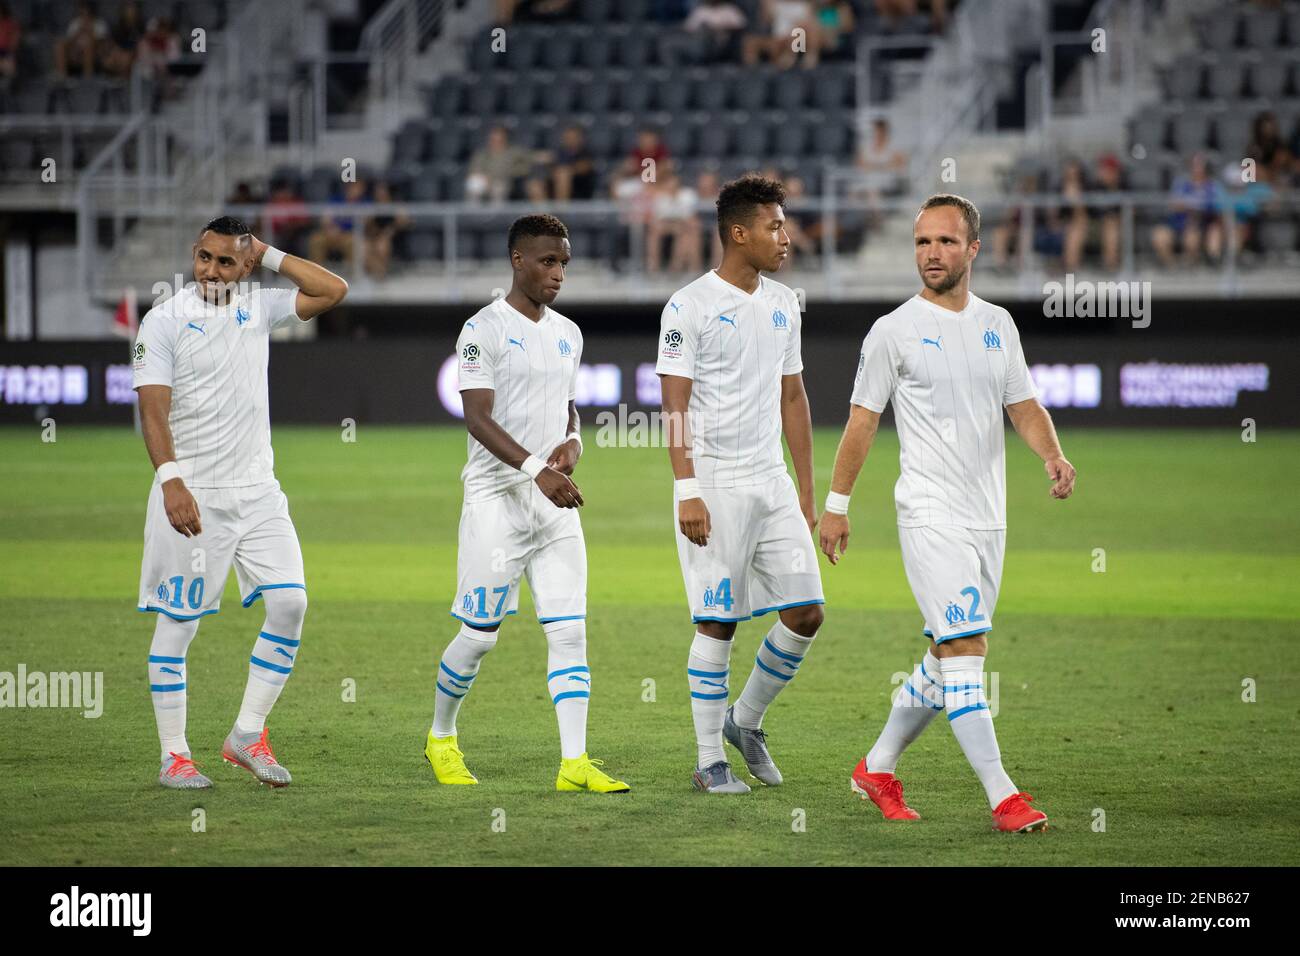 Olympique de Marseille players Dimitri Payet, Bouna Sarr, Boubacar Kamara  and Valère Germain (left to right) before their match against FC Girondins  de Bordeaux in the EA Ligue 1 Tournament on July